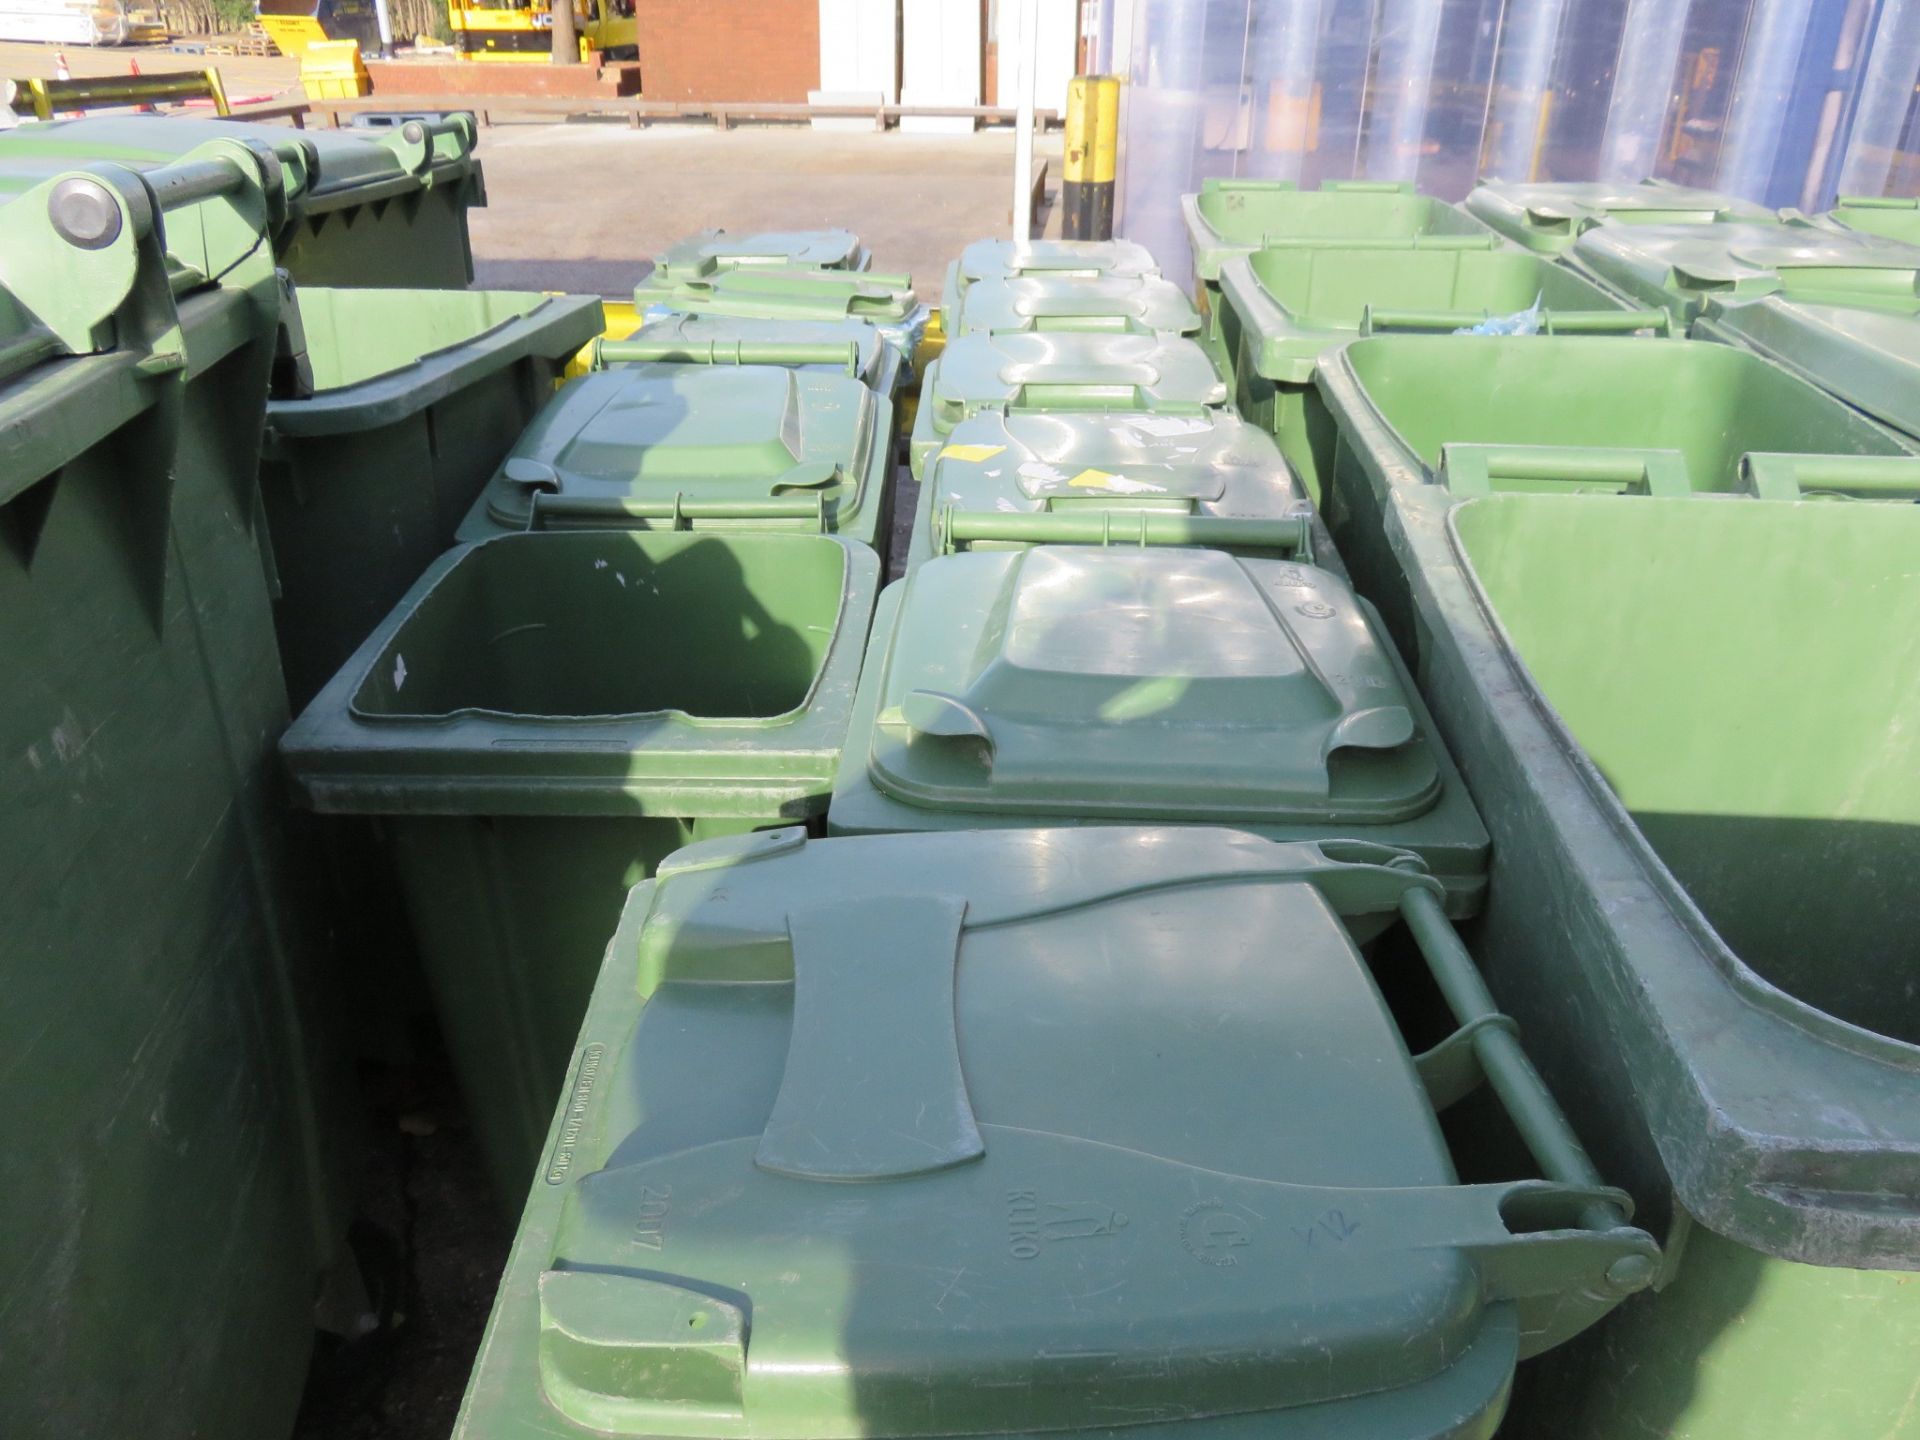 4 x Green Wheelie Bins 2 wheels by Kilco some with lids. Approx. 400 x 400 mm. Lift out charge £5